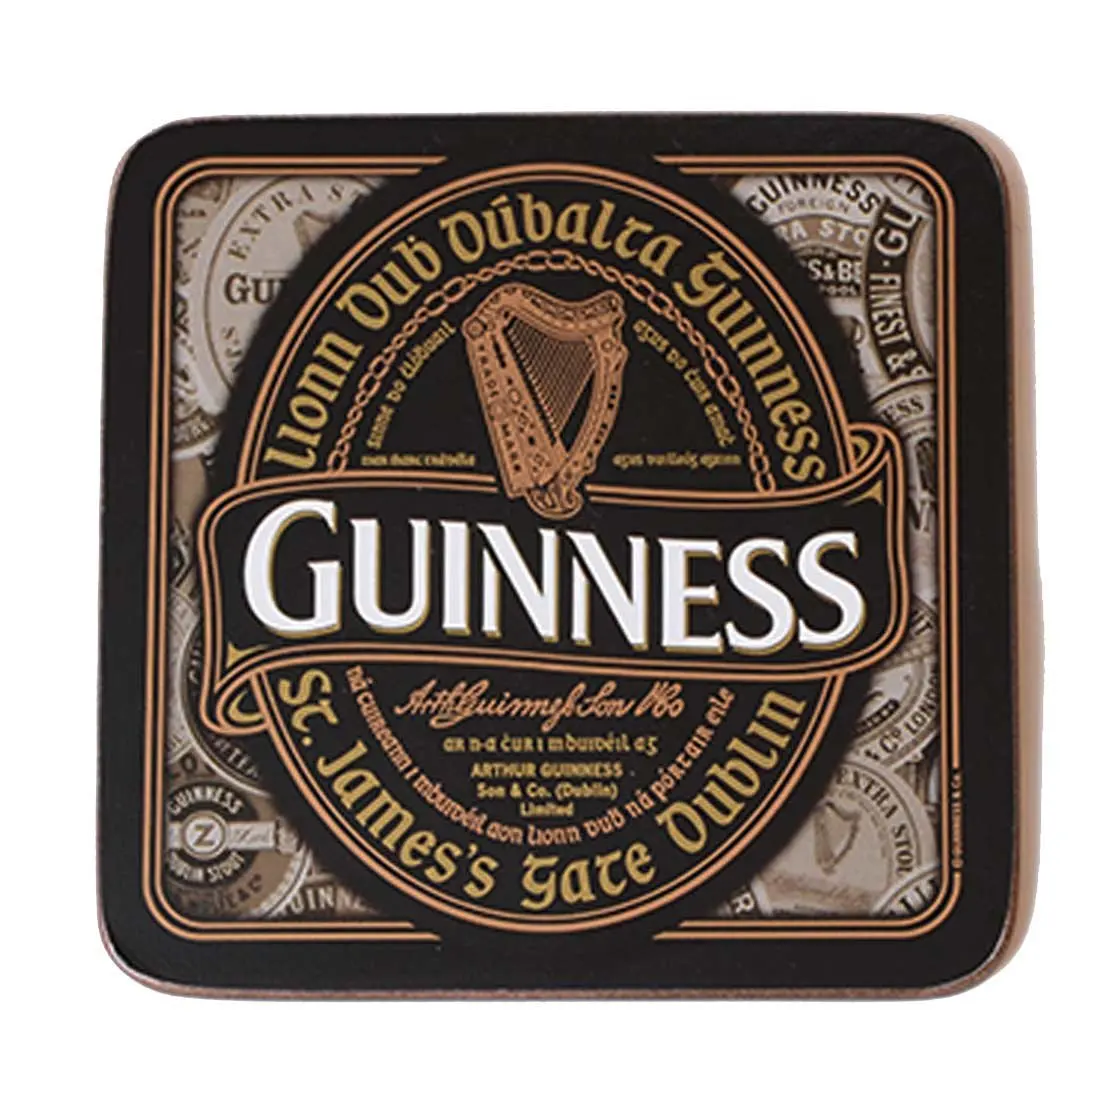 James's Gate Harp Design, 4 Pack Guinness Cork Coasters With 1759 St